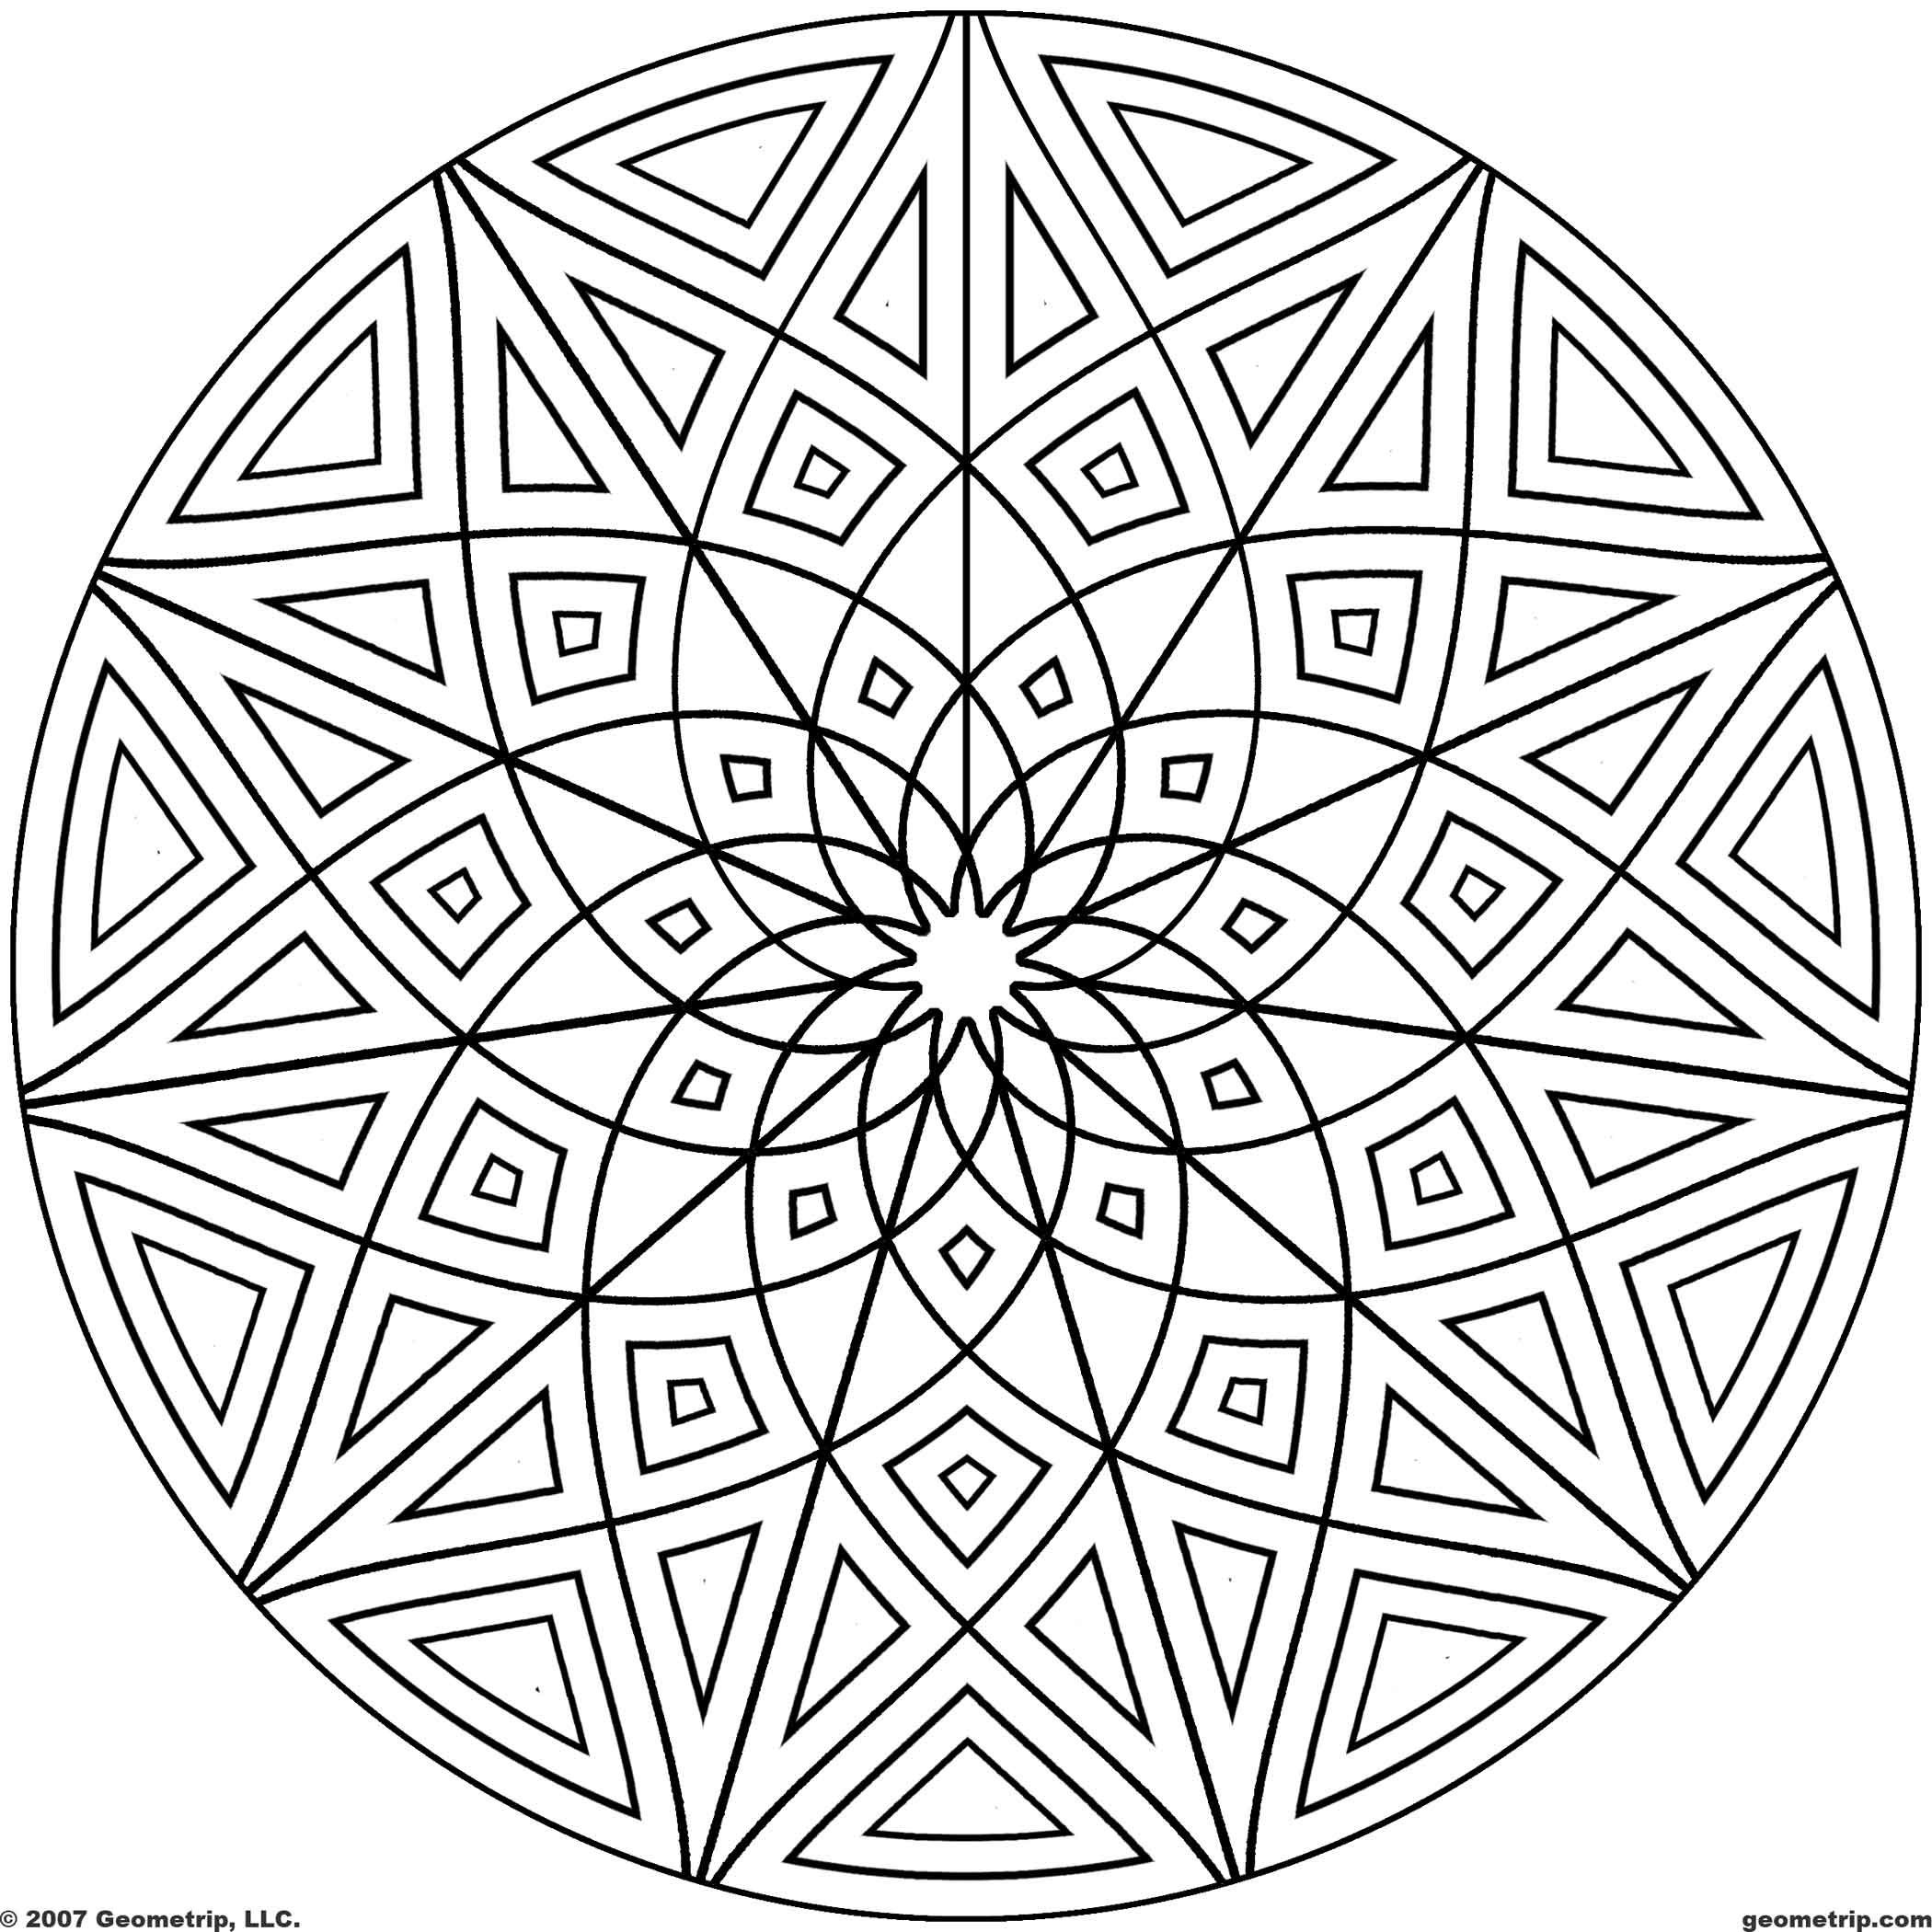 16 Free Pictures for: Printable Geometric Coloring Pages. Temoon.us